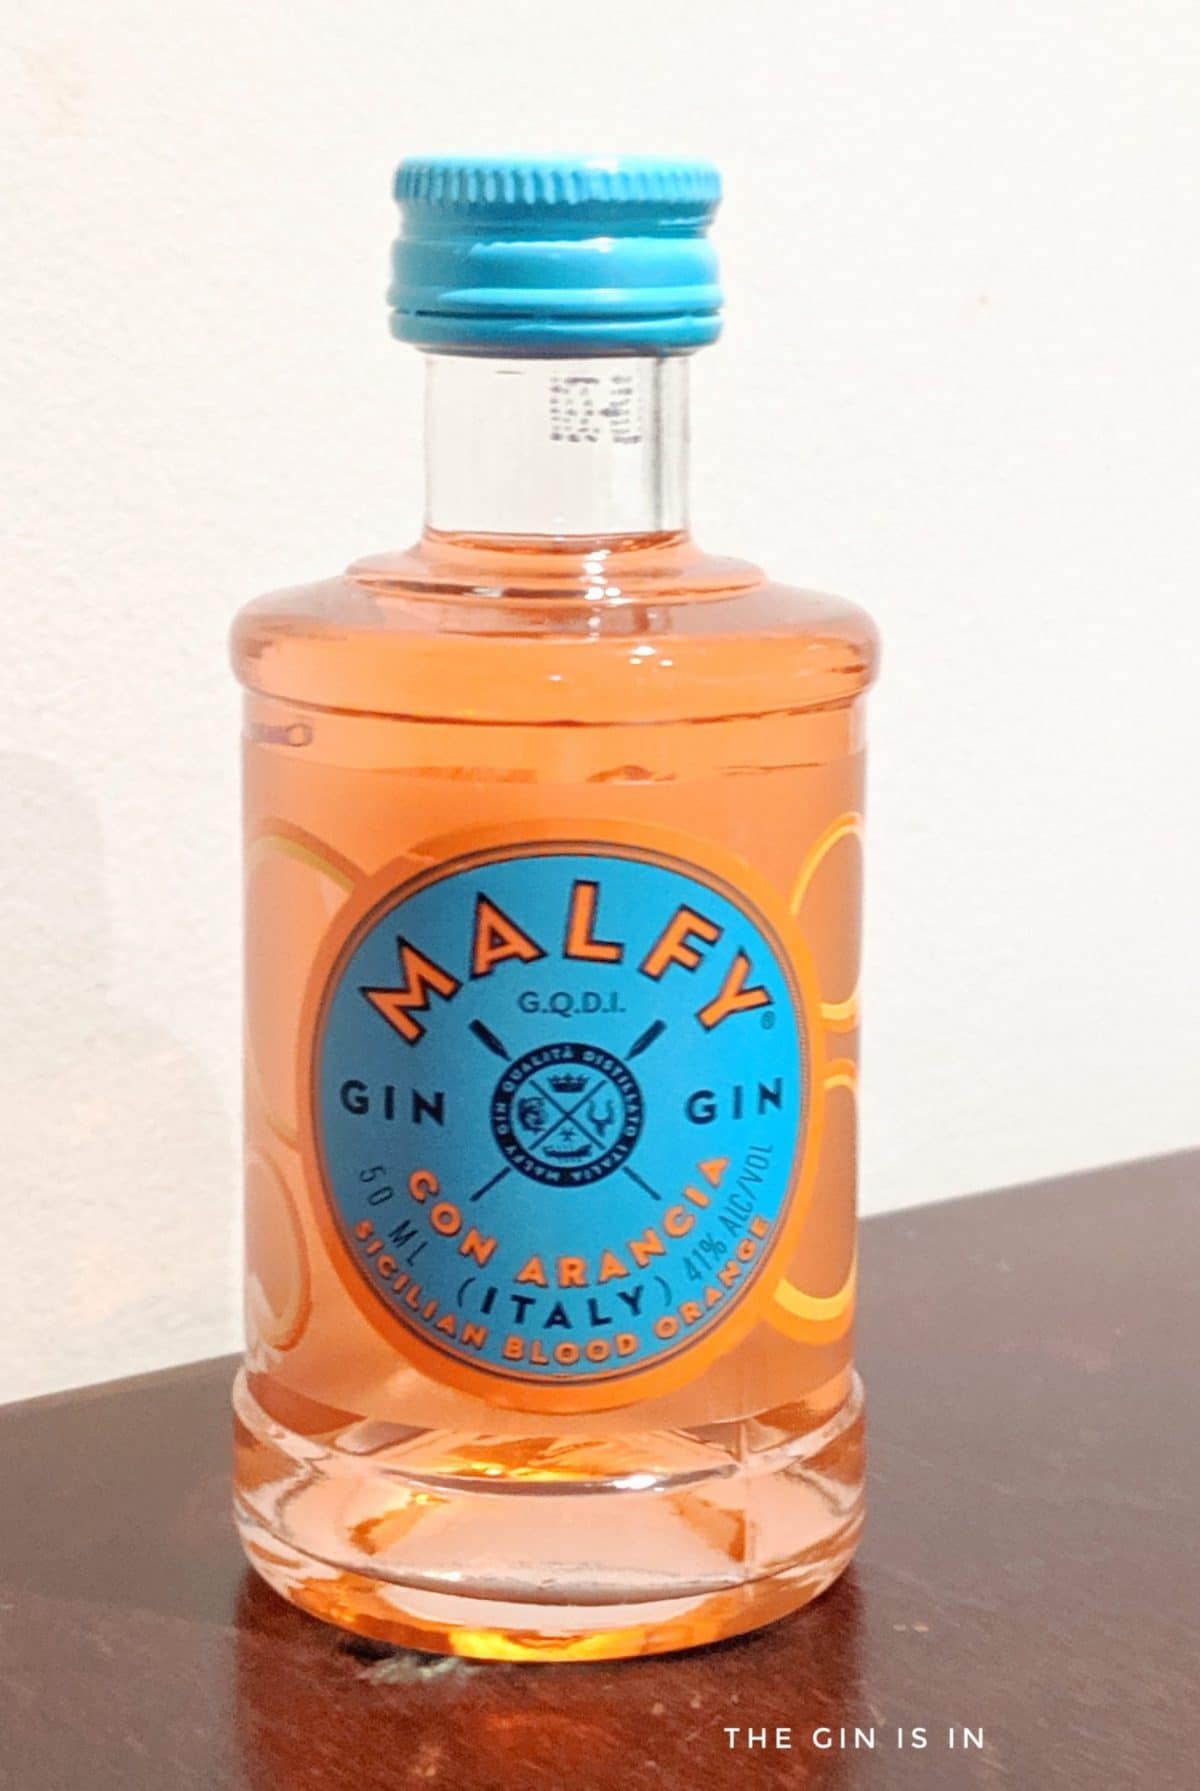 Con Arancia Notes | Expert Malfy Gin and Gin Tasting Review